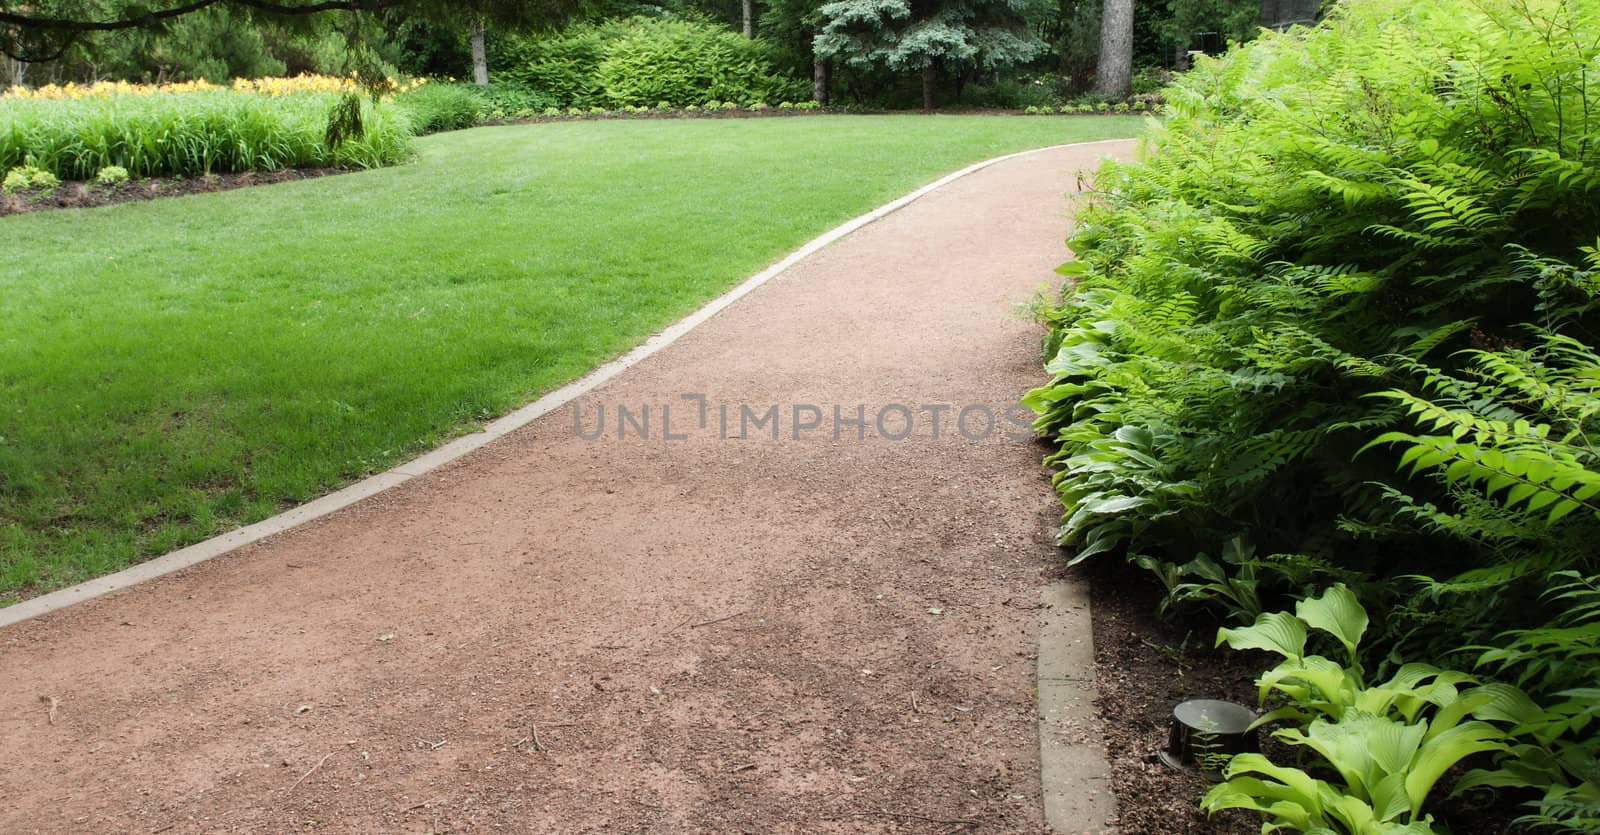 A groomed path running through a park with bushes on the right side of the image